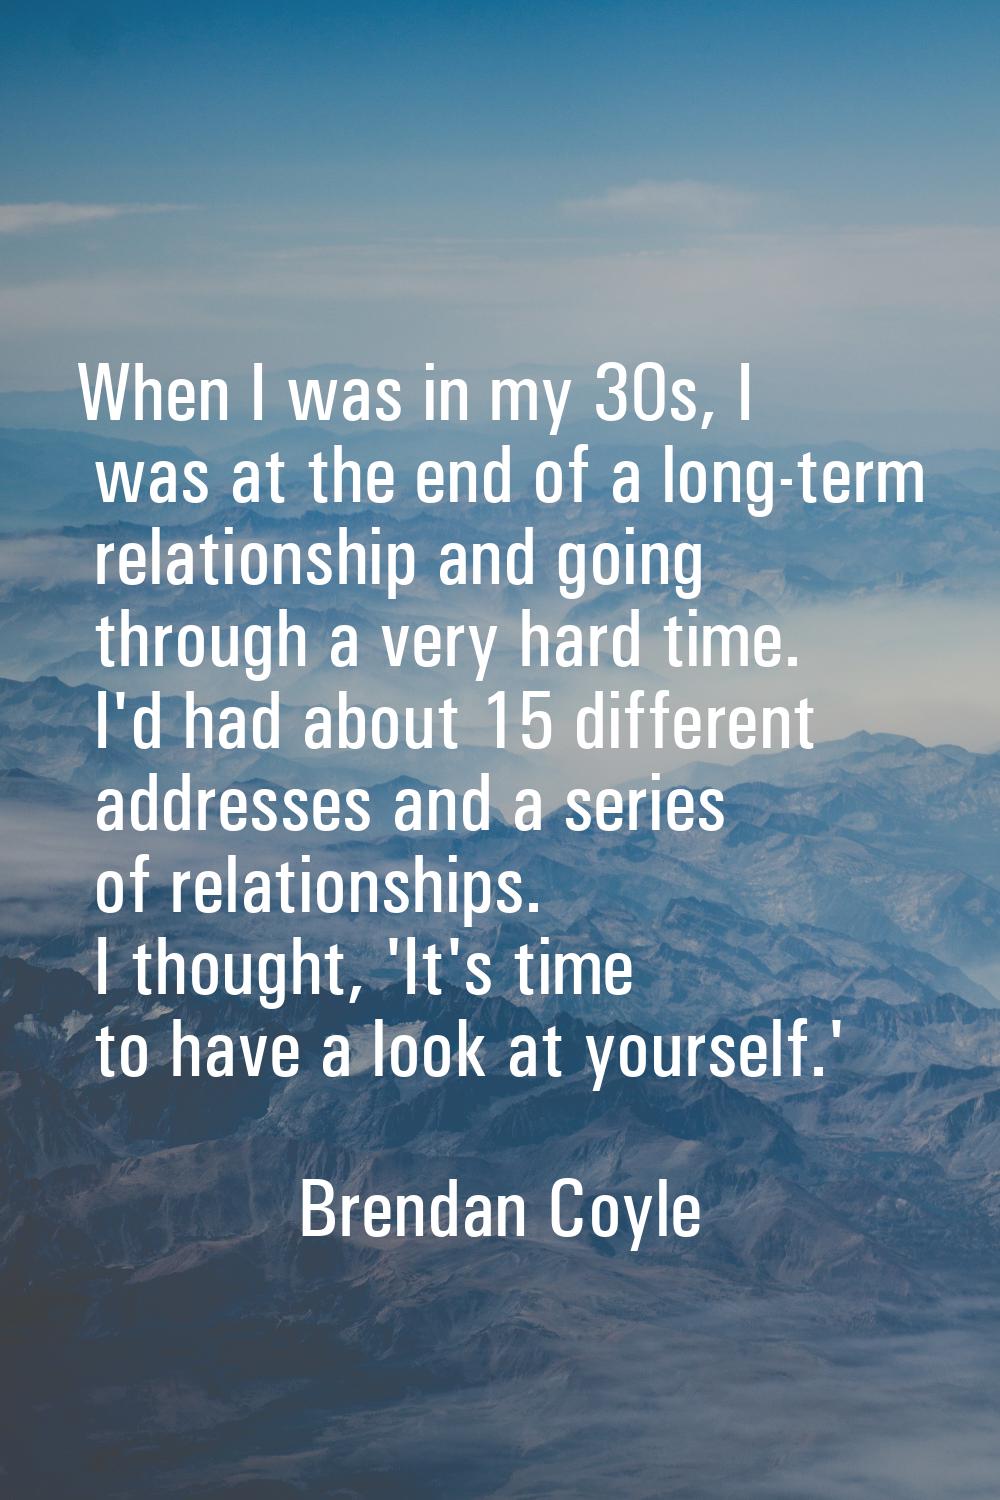 When I was in my 30s, I was at the end of a long-term relationship and going through a very hard ti